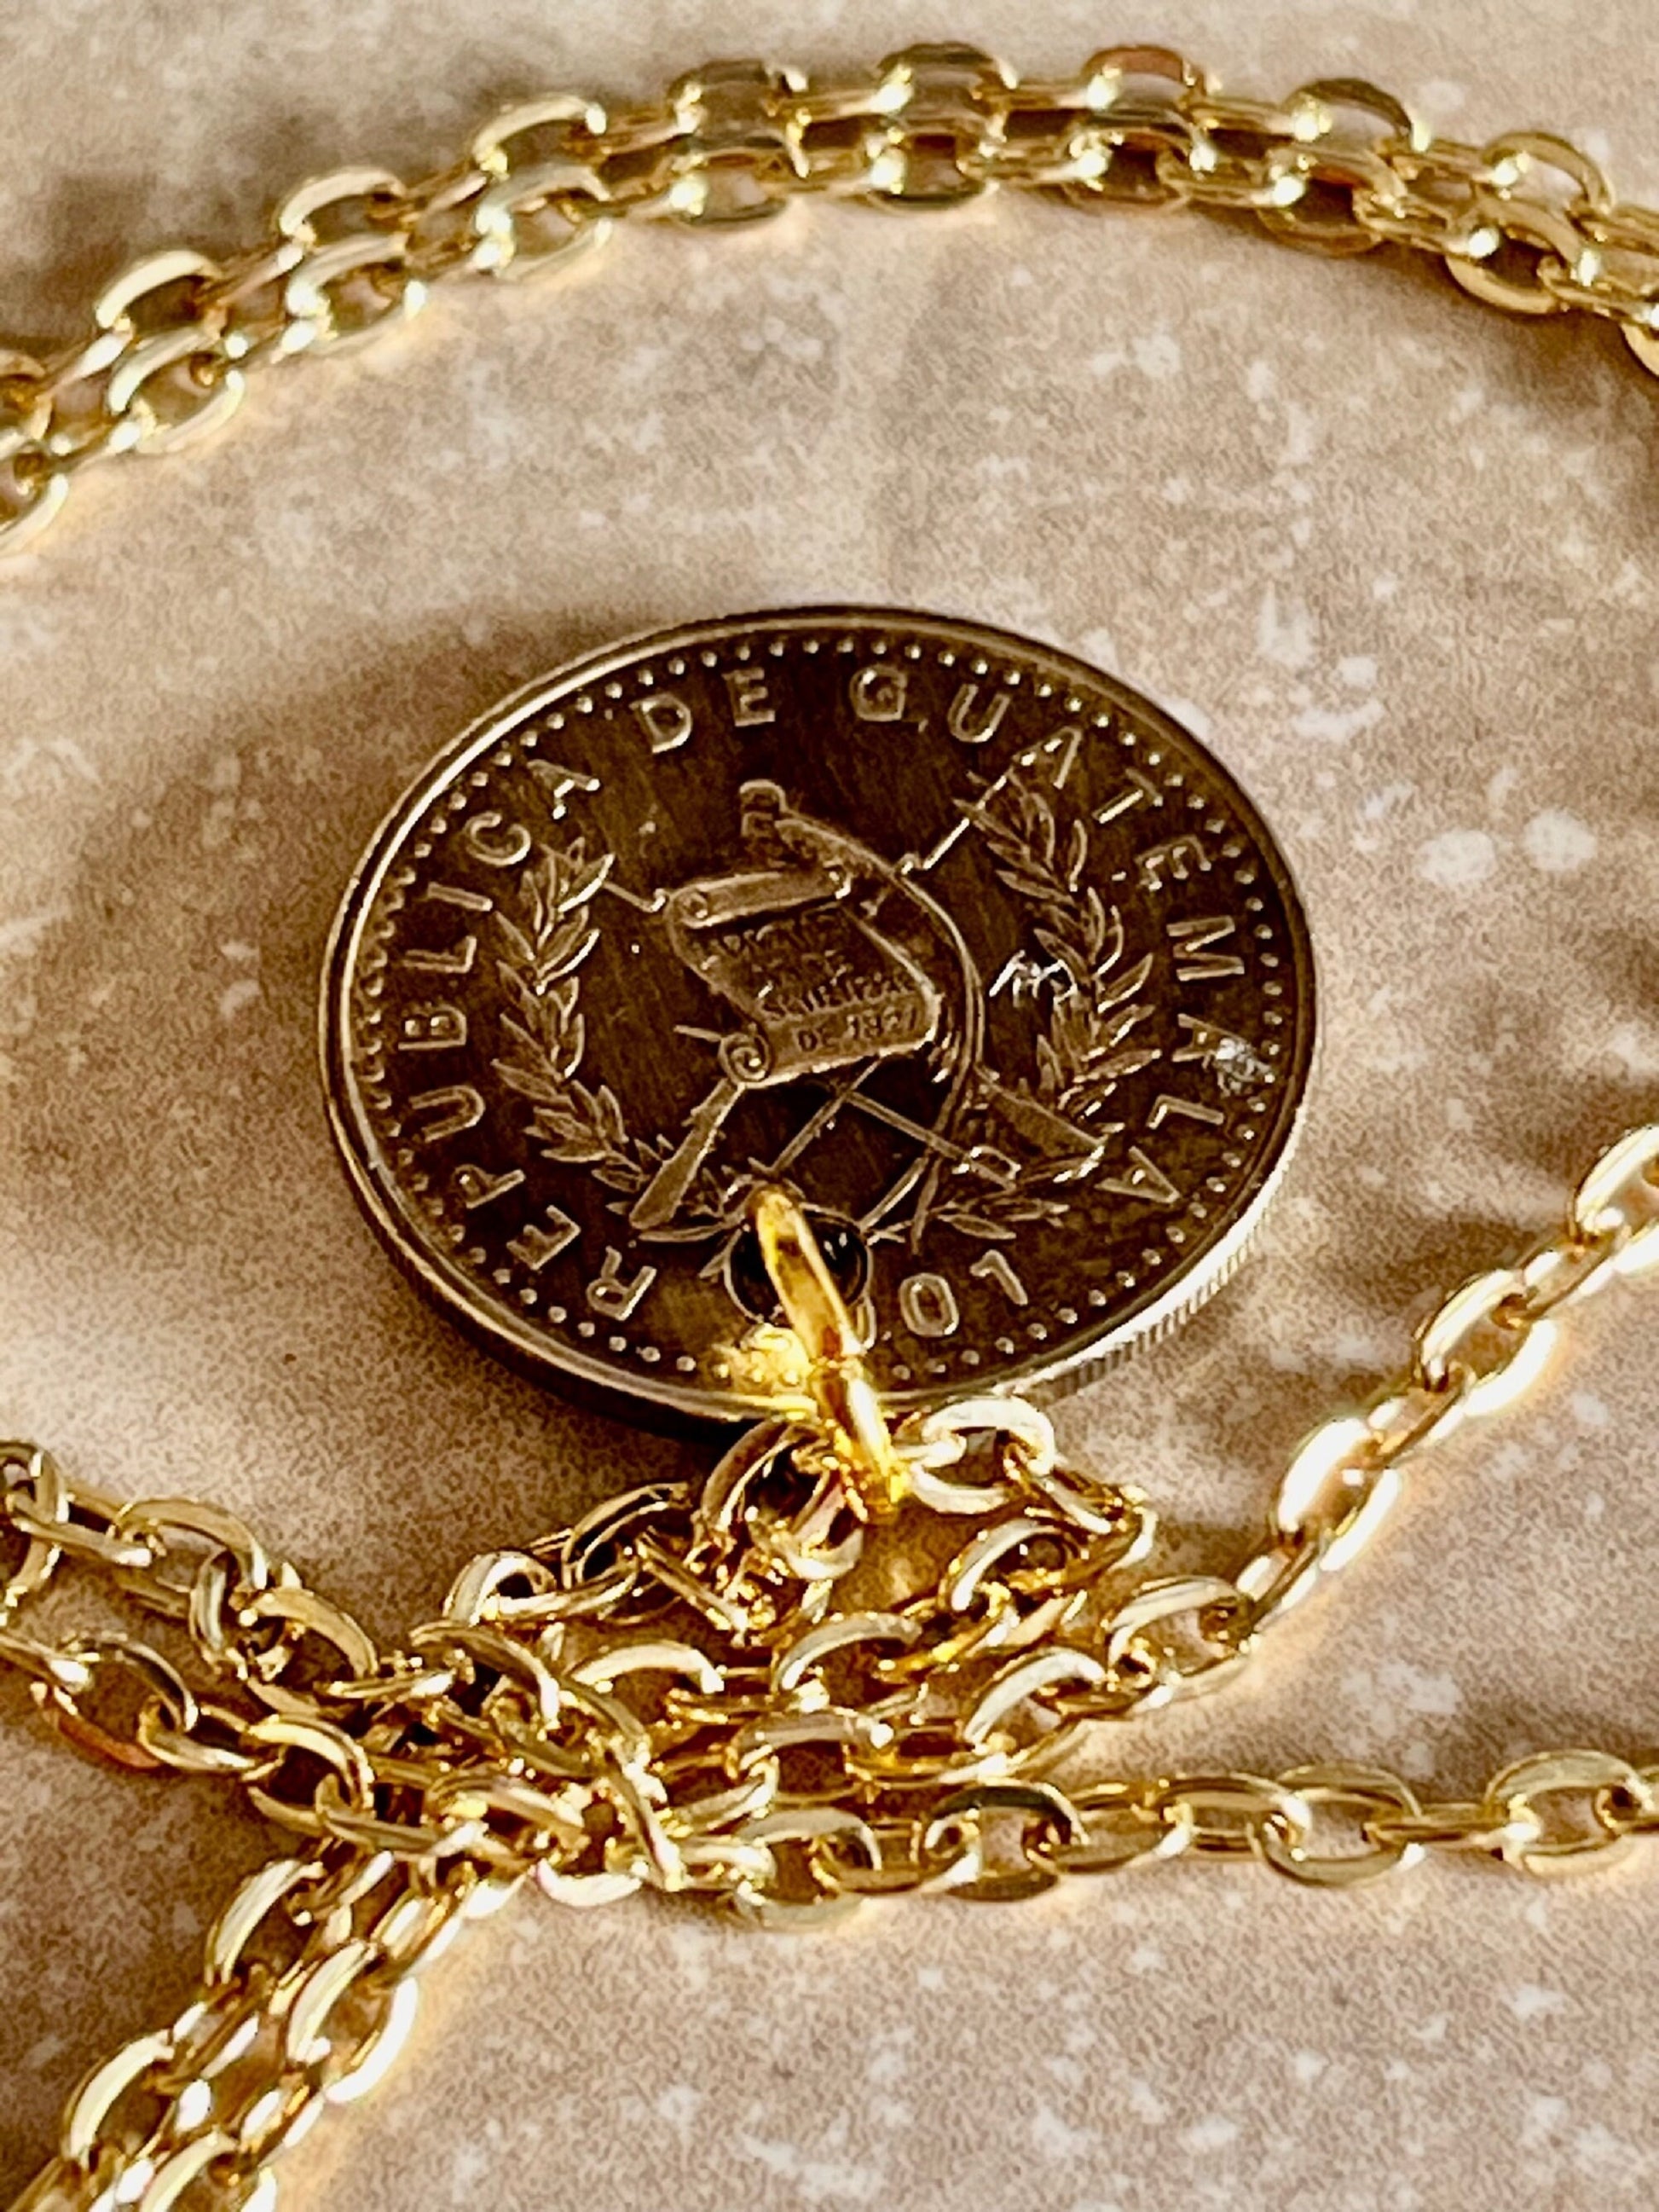 Guatemala Coin Necklace 50 Centavos Coin Pendant Personal Old Vintage Handmade Jewelry Gift Friend Charm For Him Her World Coin Collector